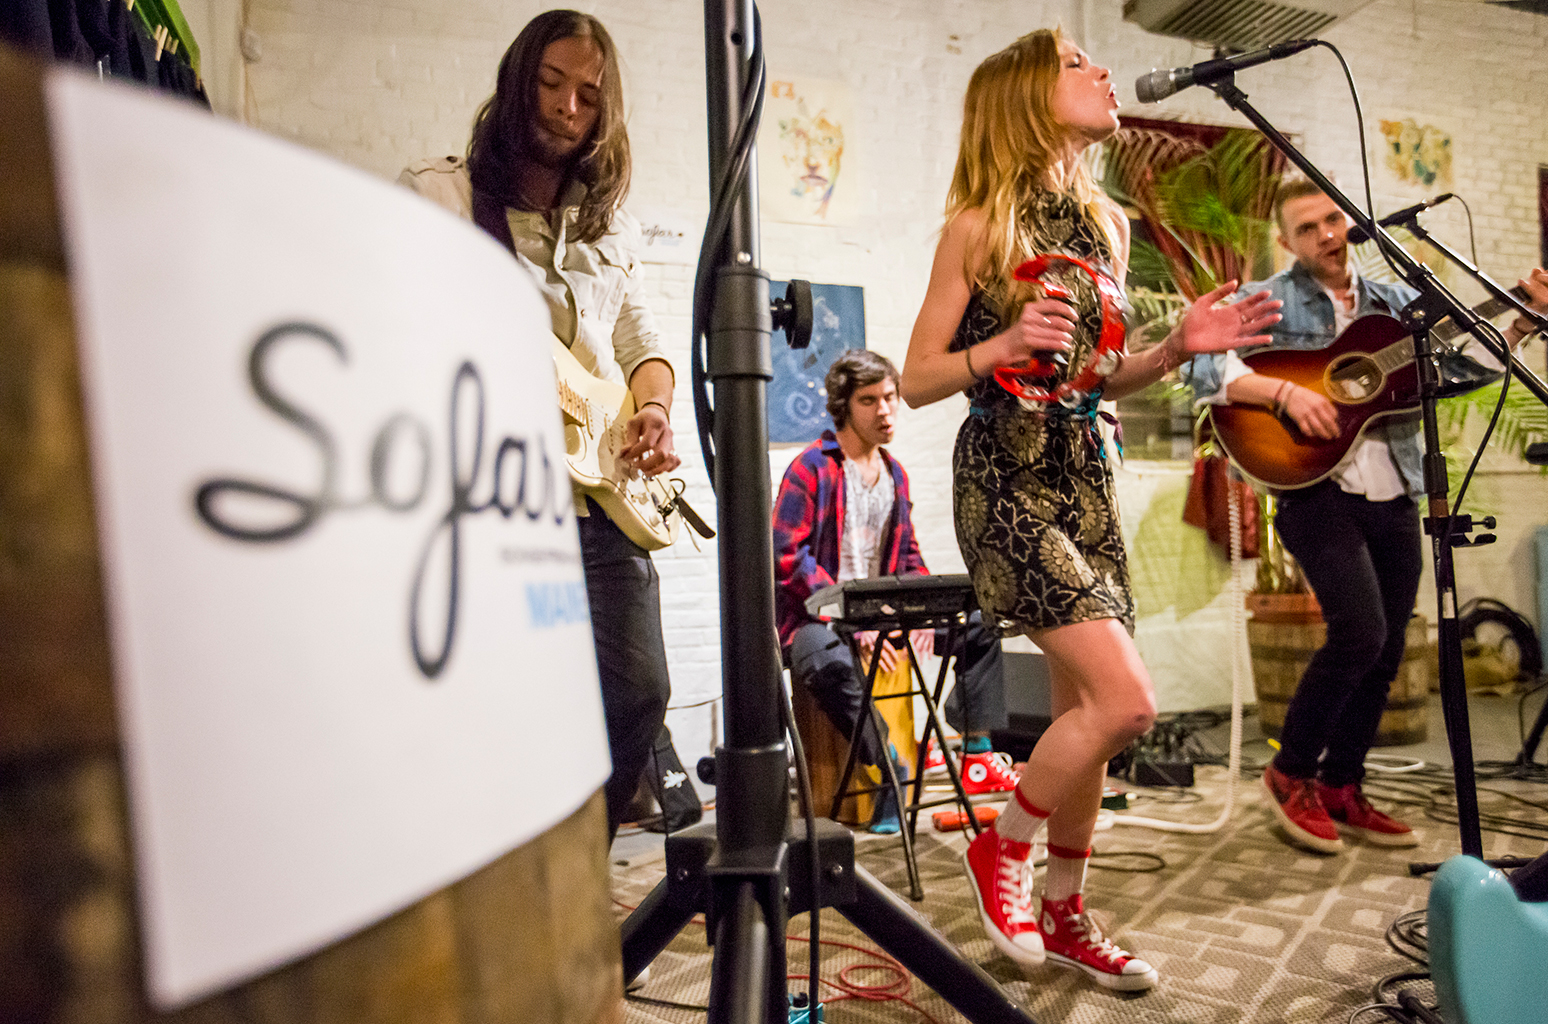 Sofar Sounds Reaches $460K Settlement With Department of Labor Over Unpaid Wages - www.billboard.com - New York